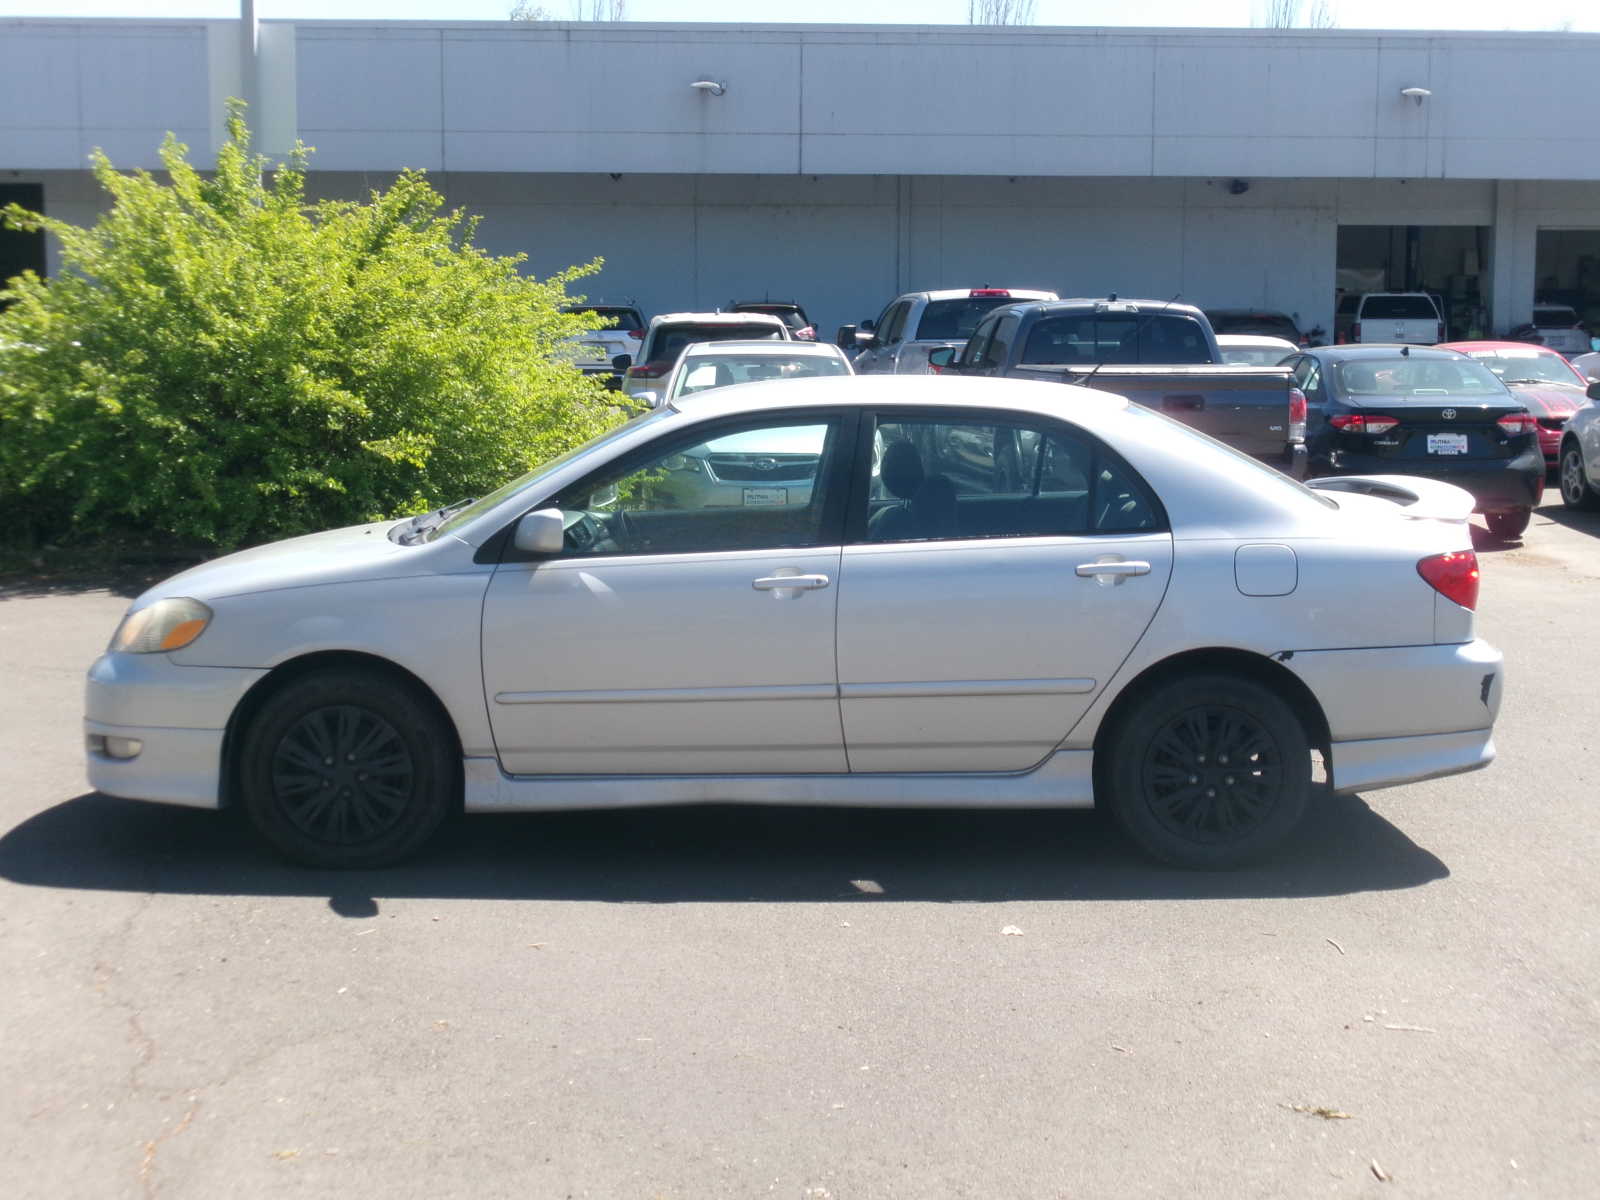 Used 2005 Toyota Corolla S with VIN 1NXBR32E55Z408000 for sale in Eugene, OR